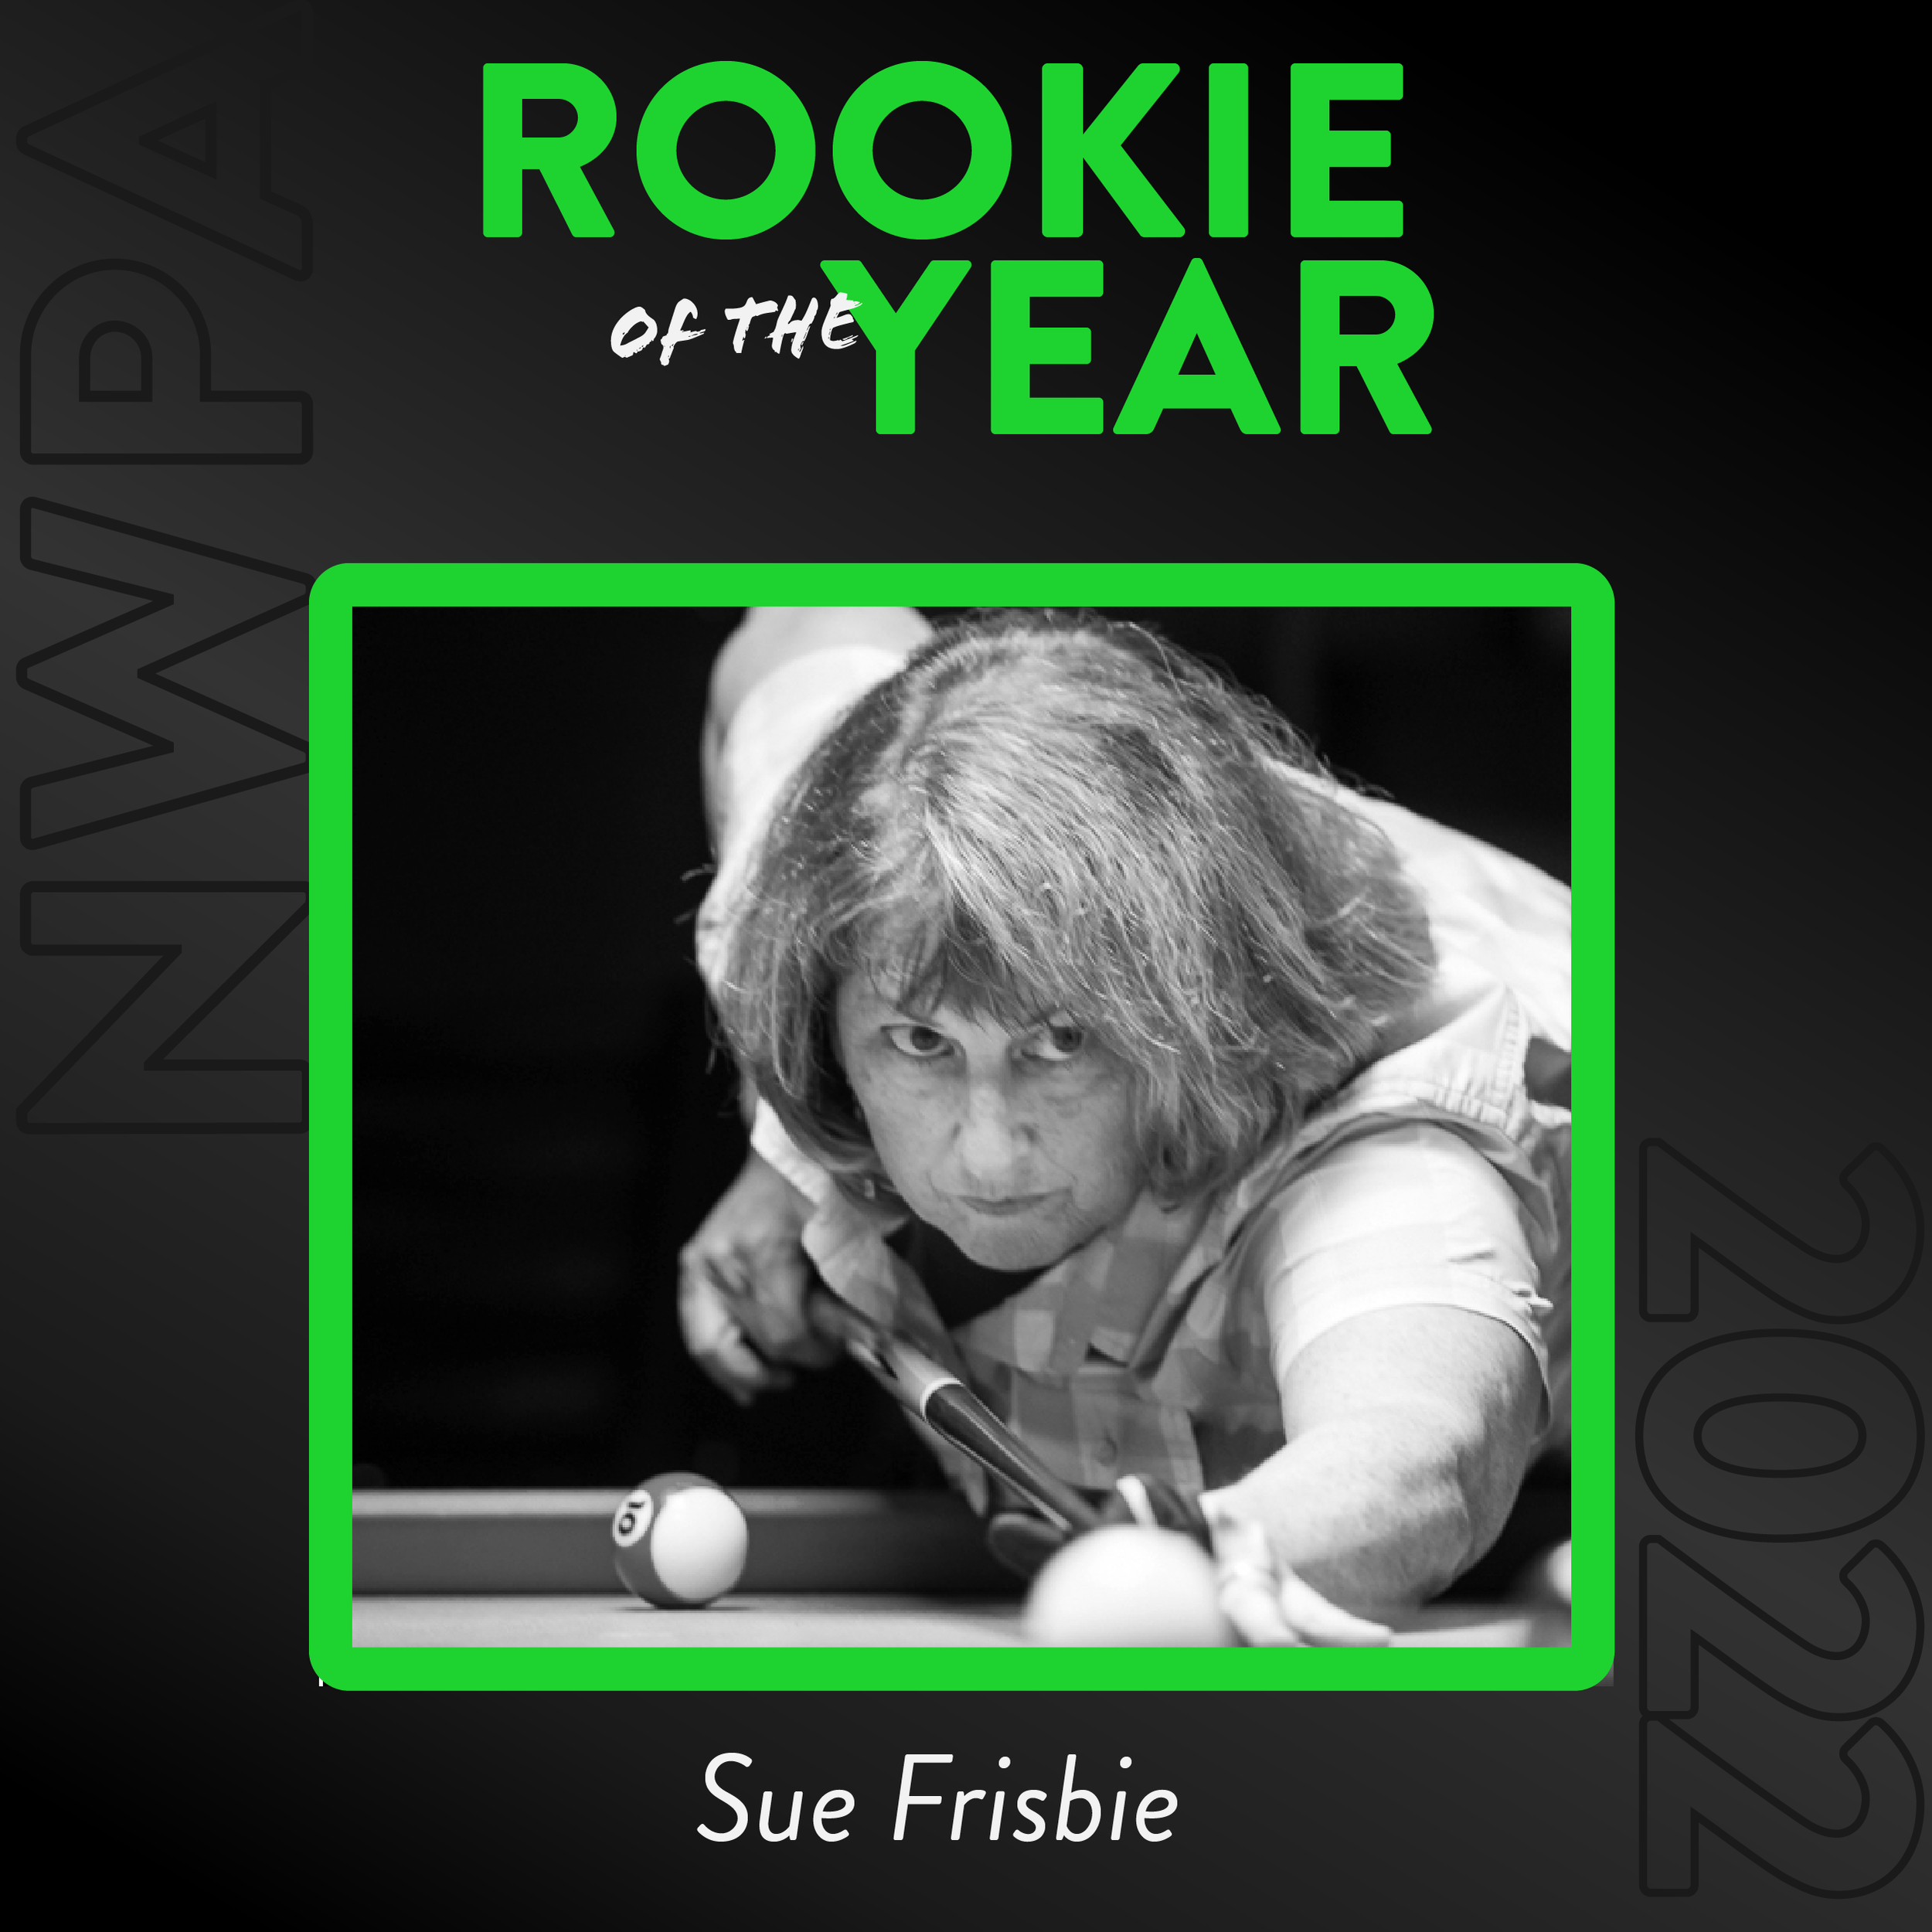 Rookie of the Year - Sue Frisbie